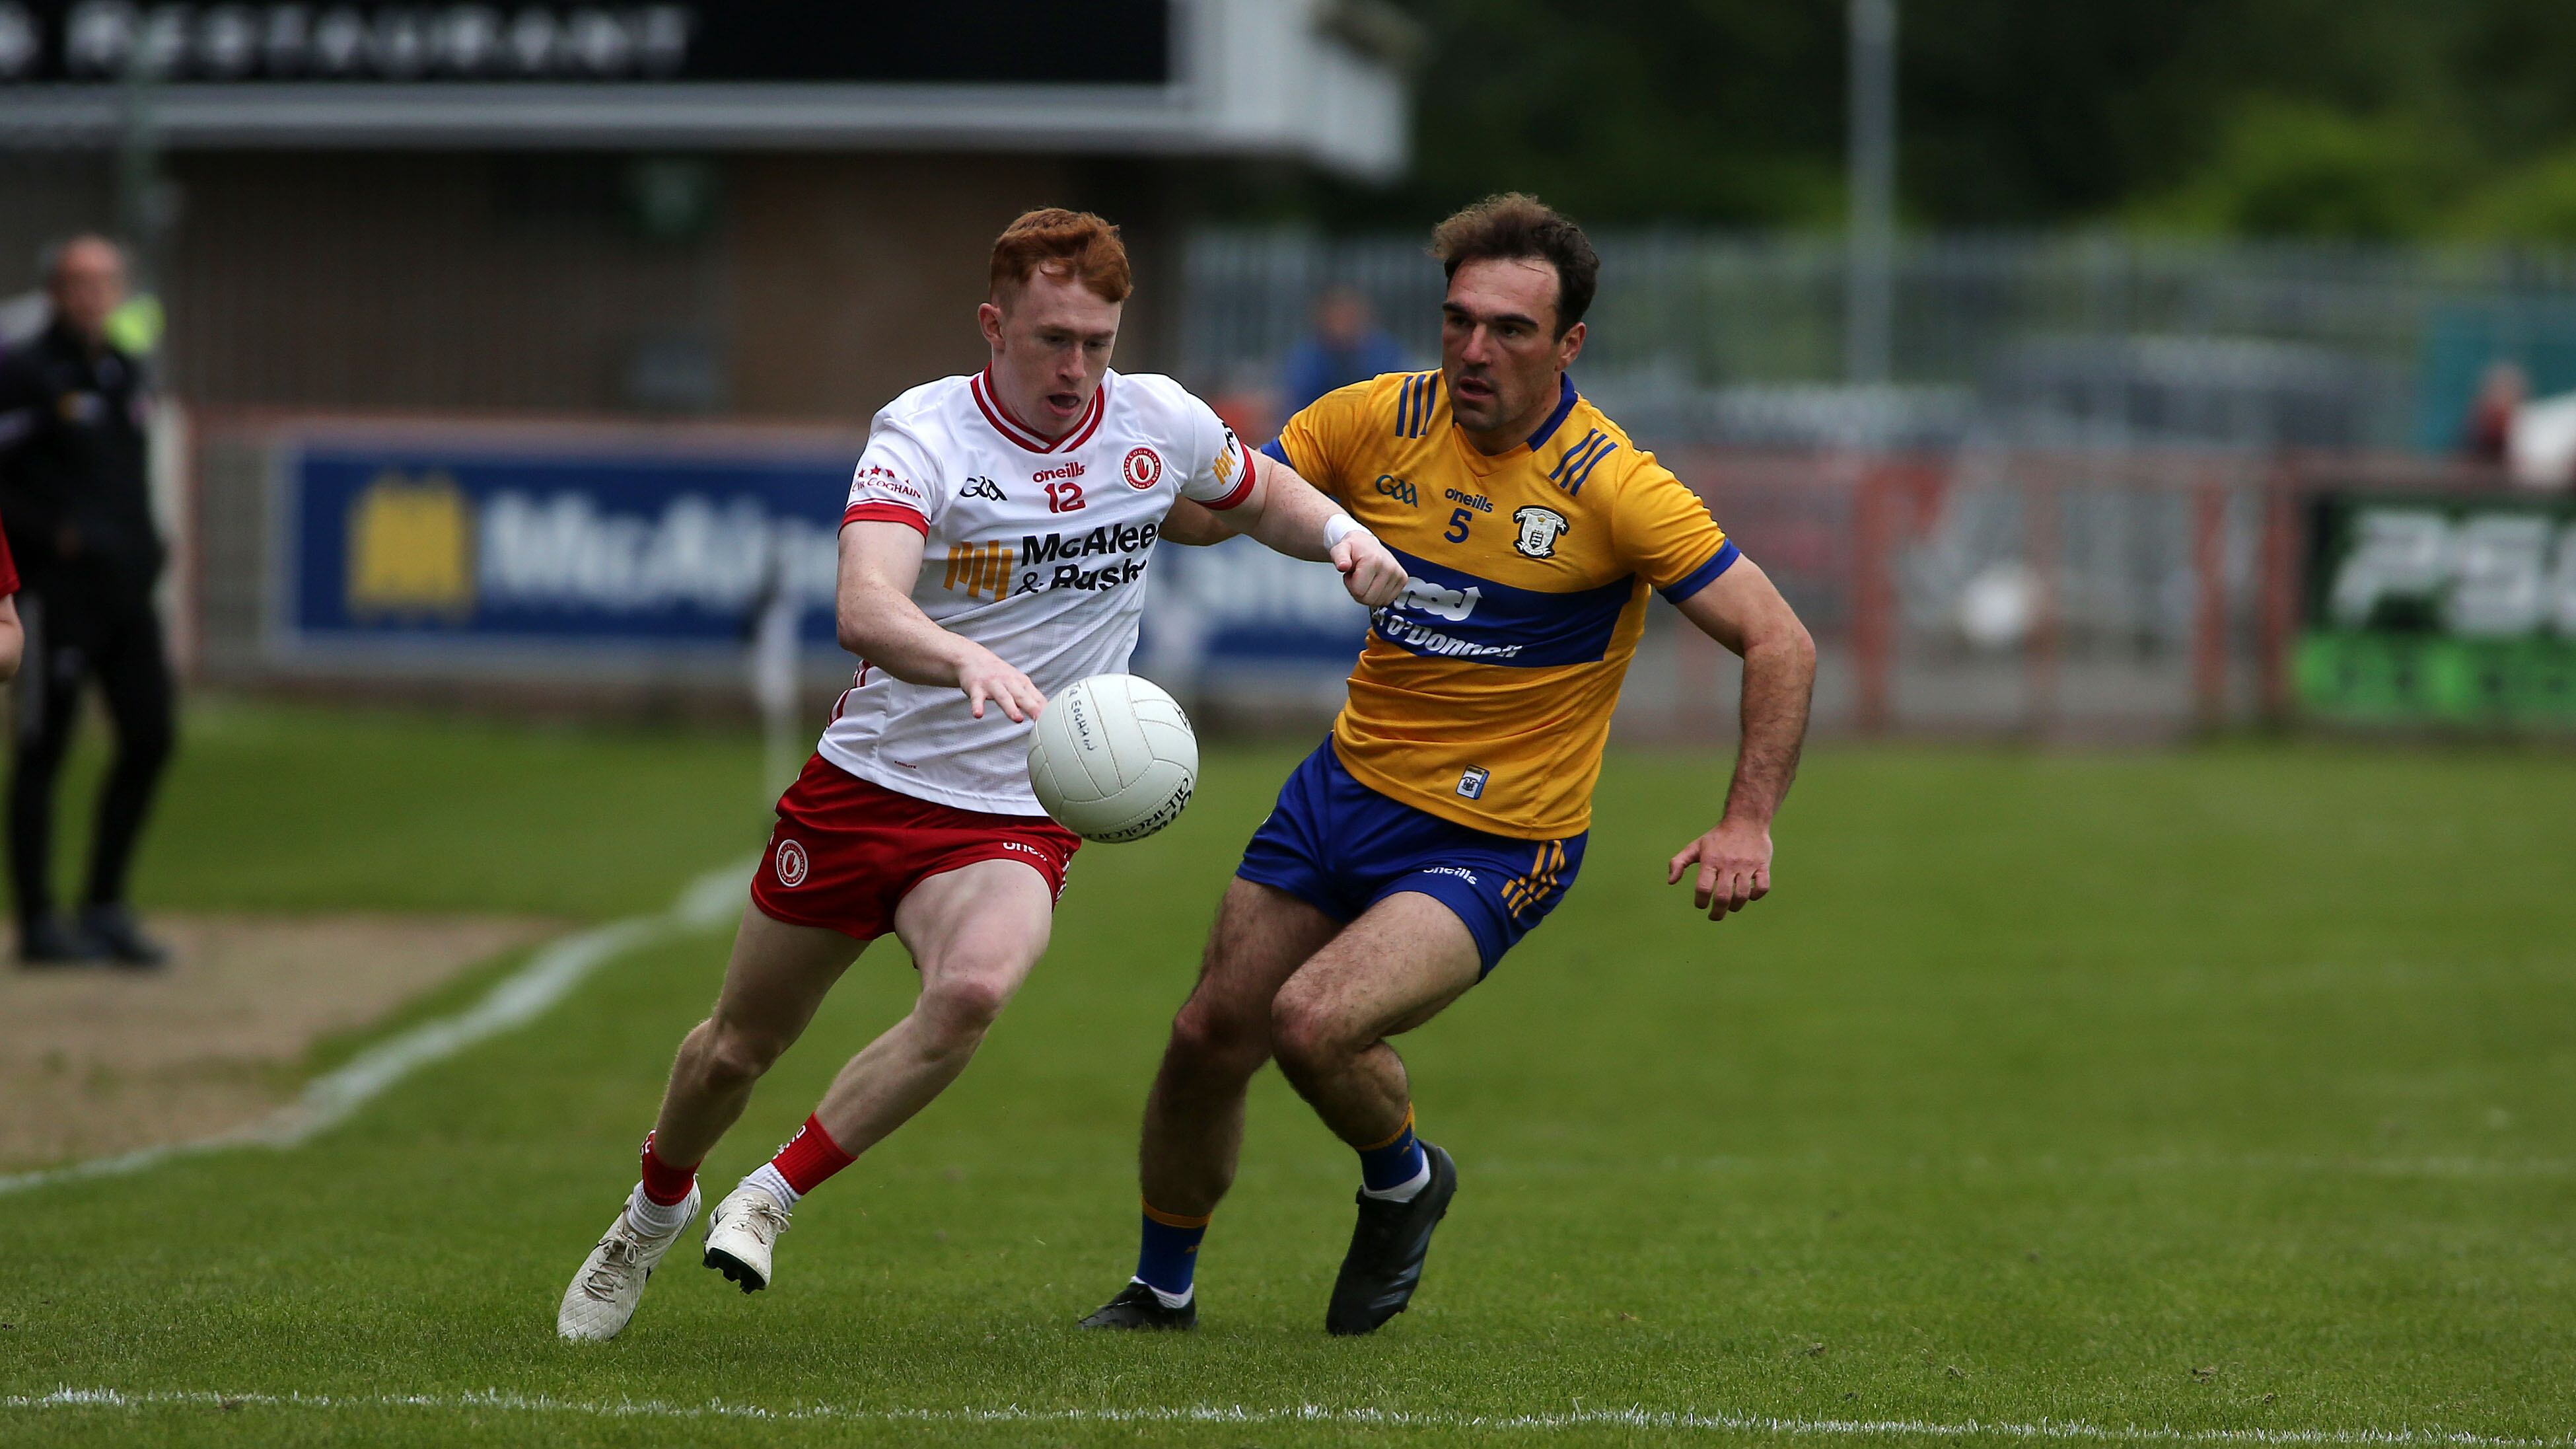 Clare defender Alan Sweeney tackles as Seanie O'Donnell goes on the attack for Tyrone. Picture: Seamus Loughran